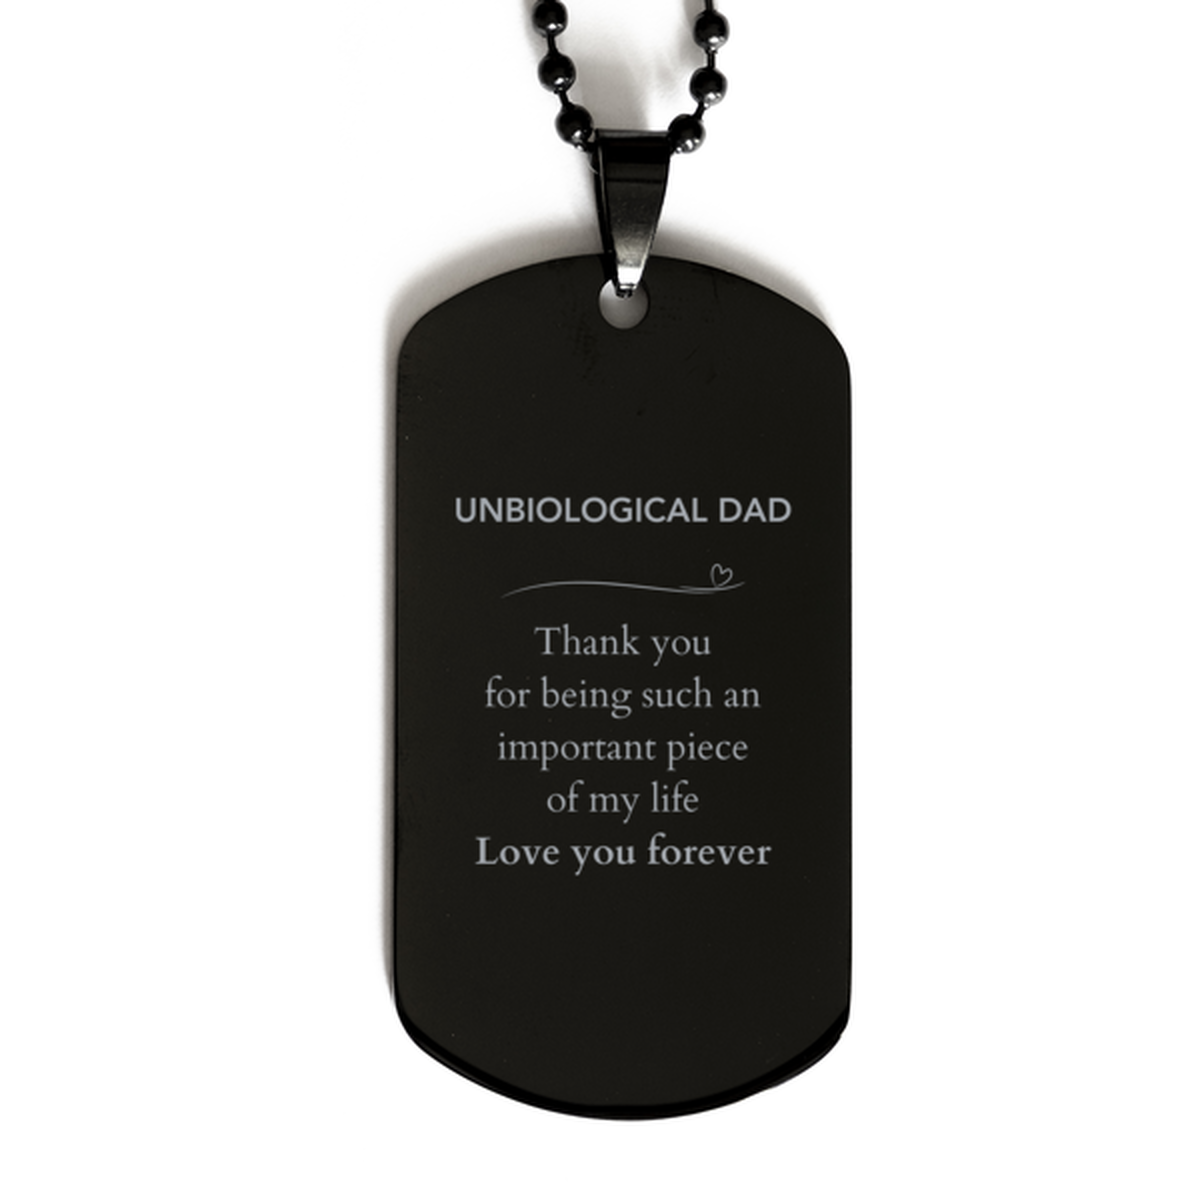 Appropriate Unbiological Dad Black Dog Tag Epic Birthday Gifts for Unbiological Dad Thank you for being such an important piece of my life Unbiological Dad Christmas Mothers Fathers Day